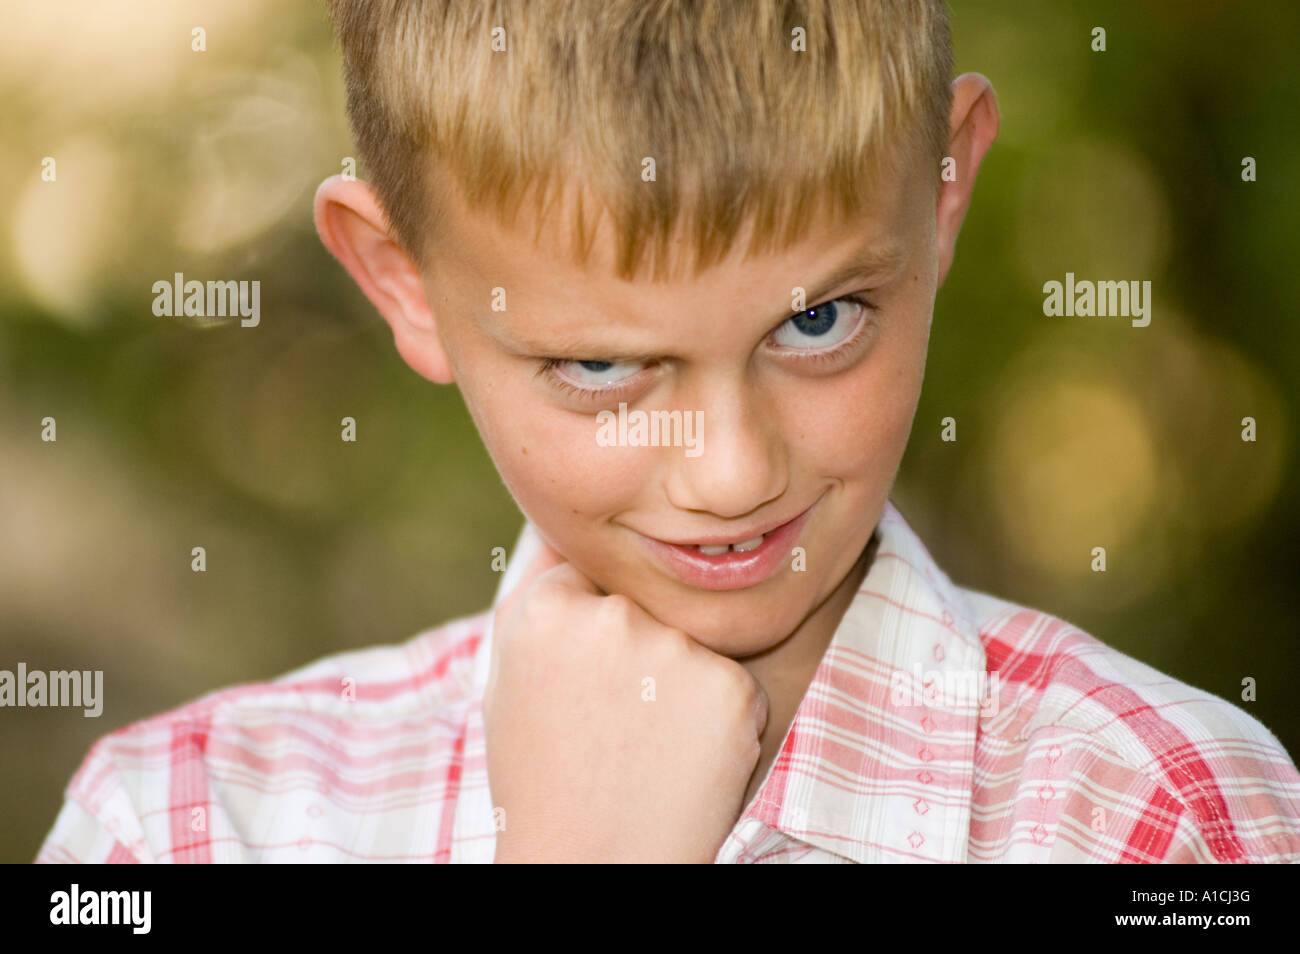 Nine year old boy with a mischievous look on his face Stock Photo - Alamy